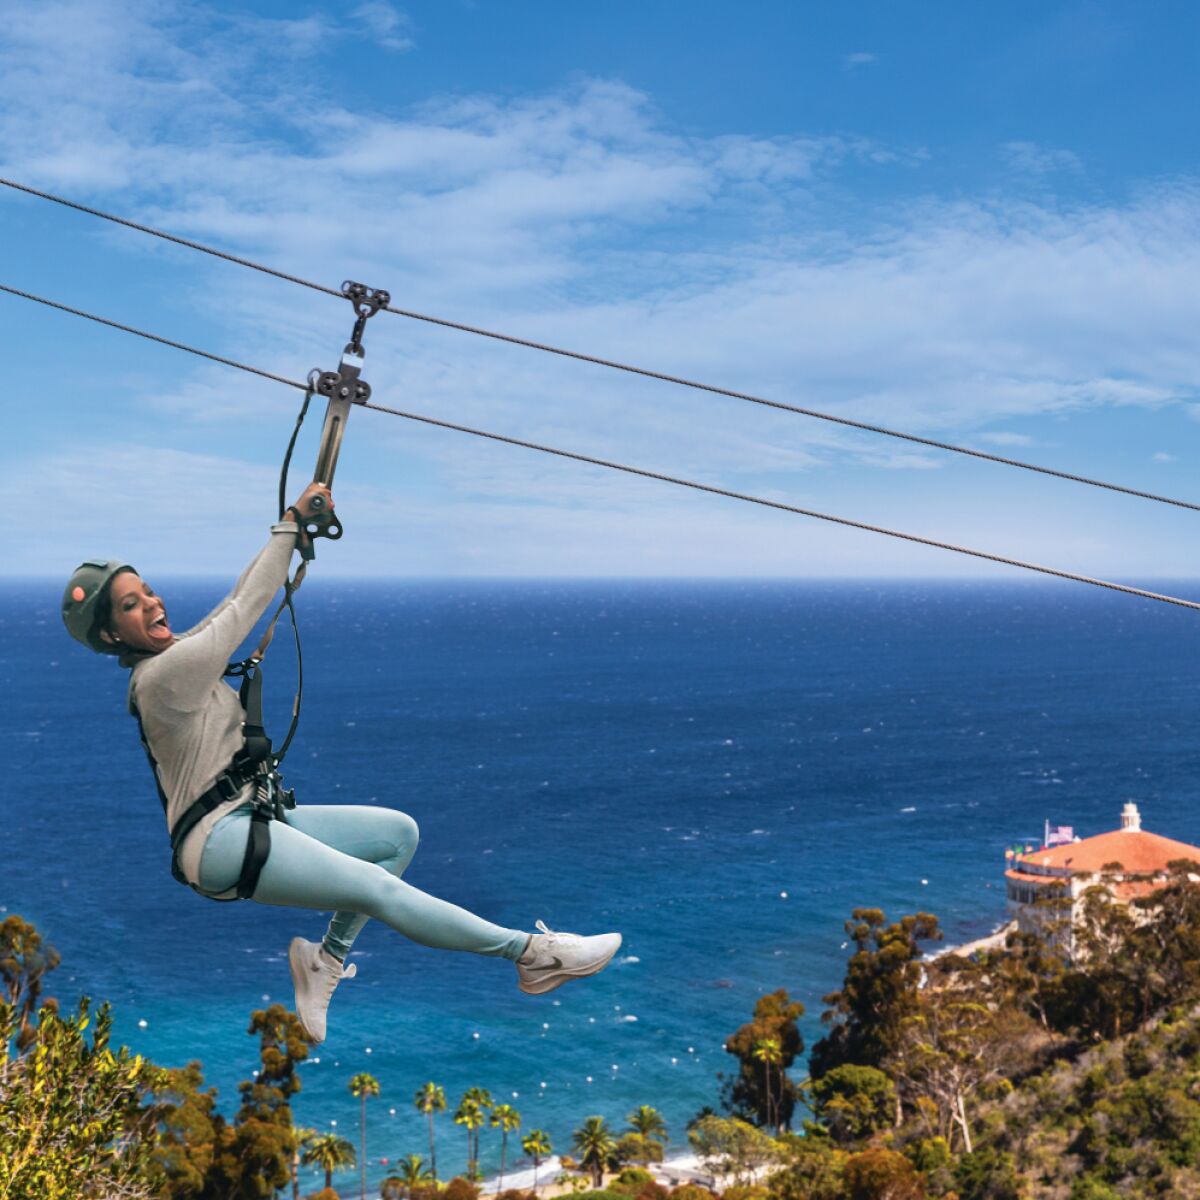 A person on a zipline.